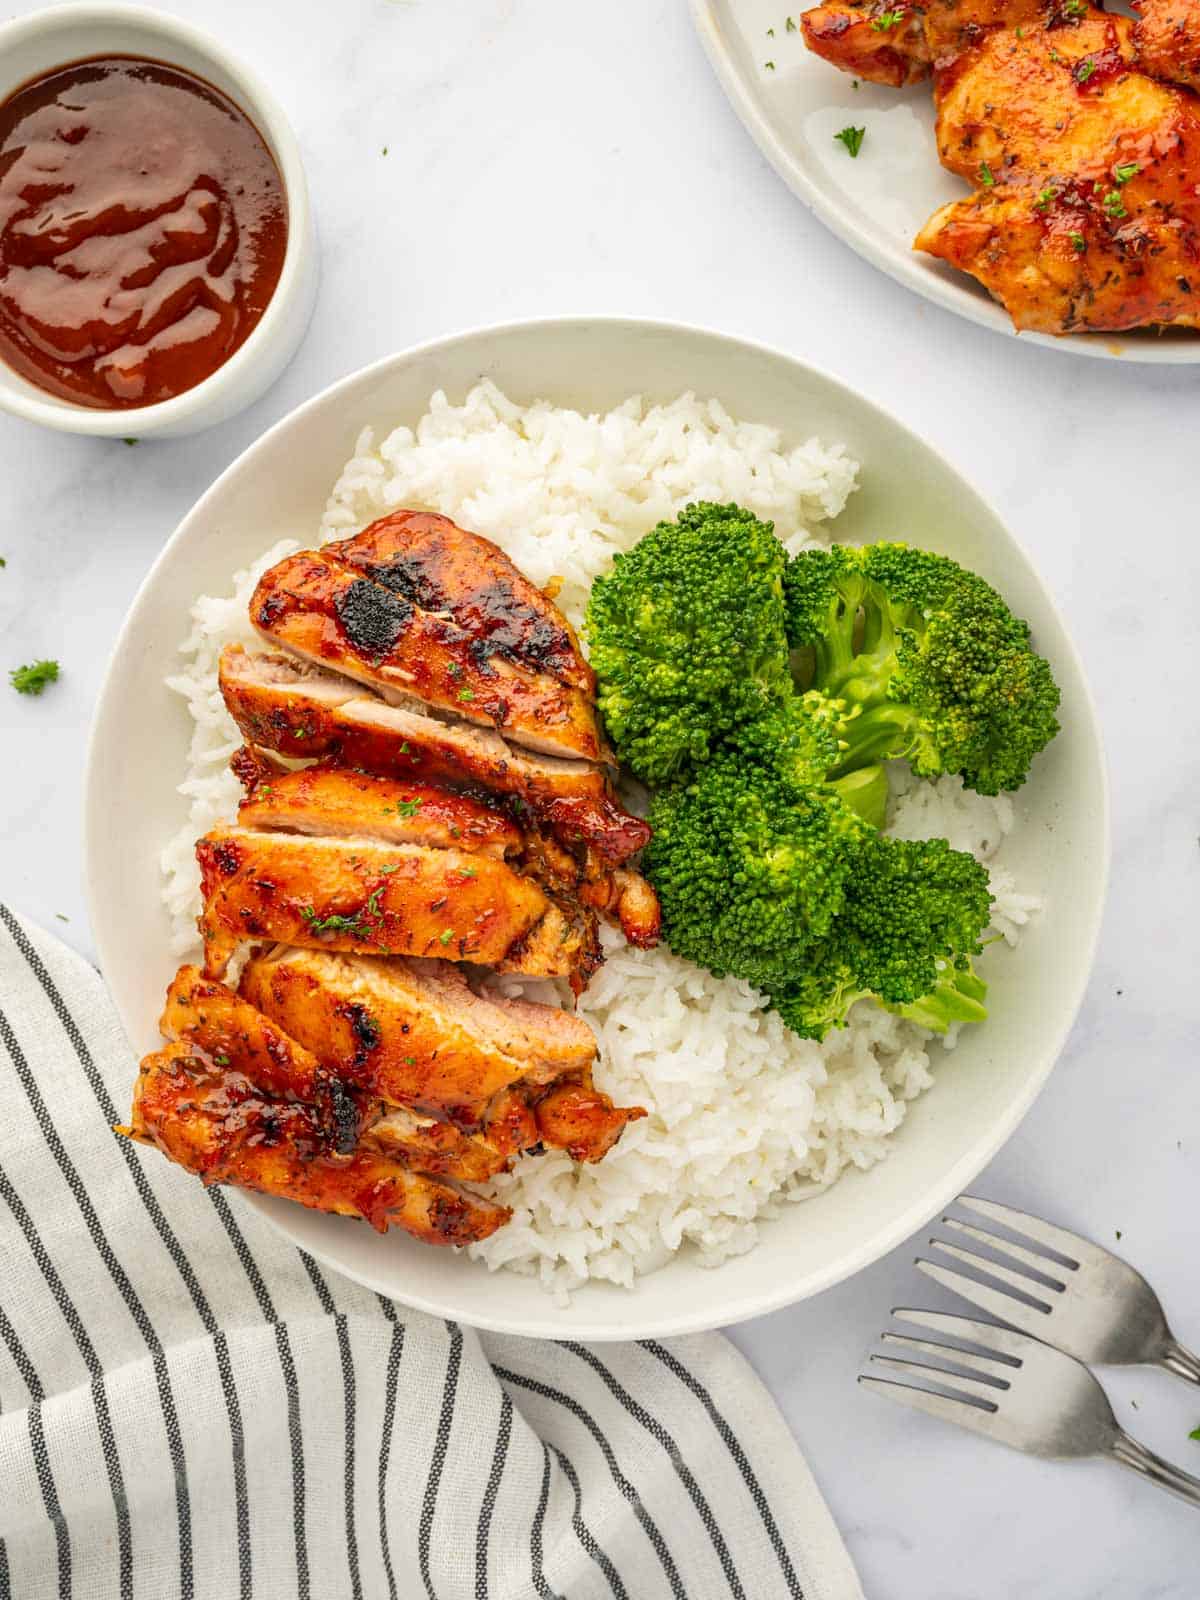 Chicken thighs on a plate with broccoli and rice.